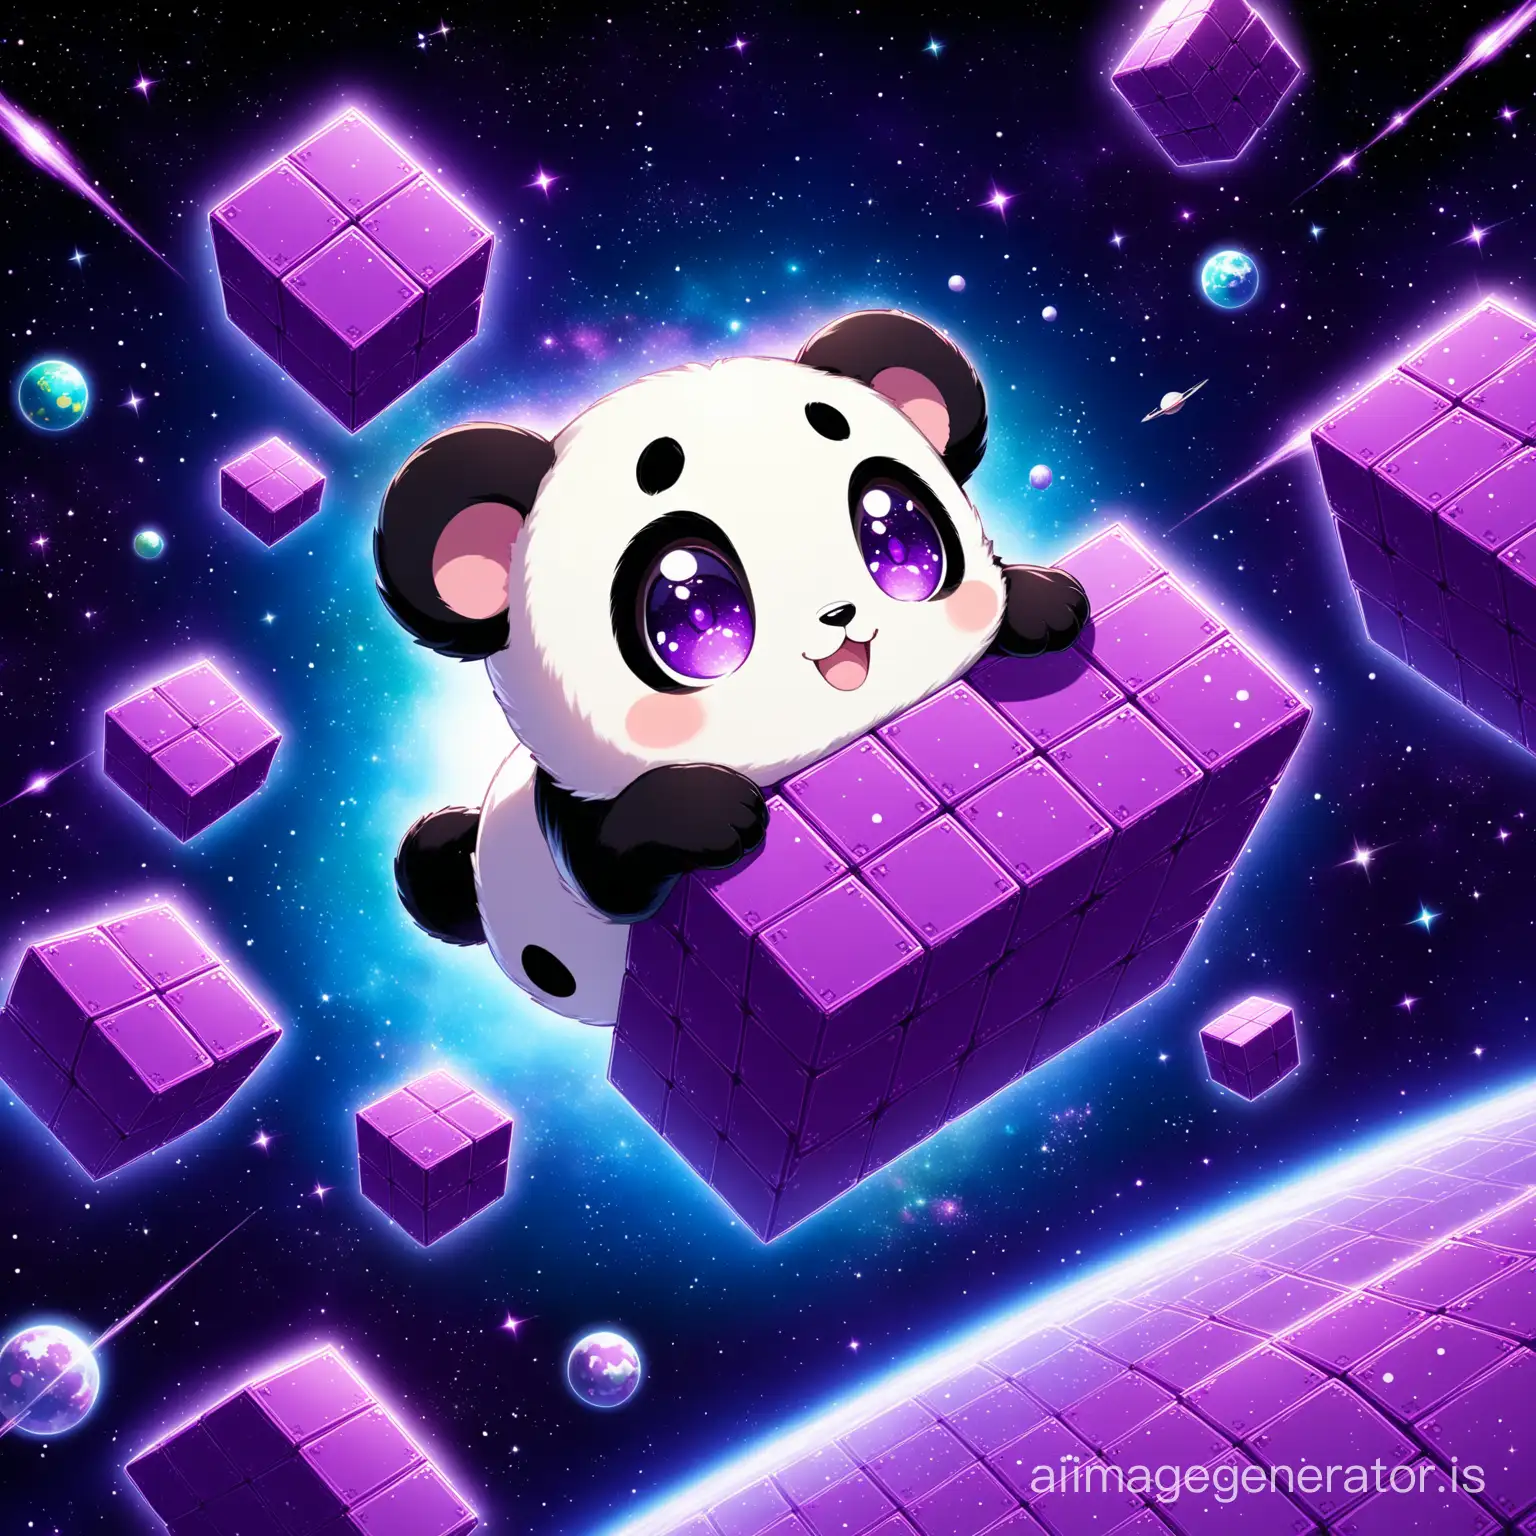 Adorable-Purple-Space-Panda-Blocks-Detailed-and-High-Quality-Image